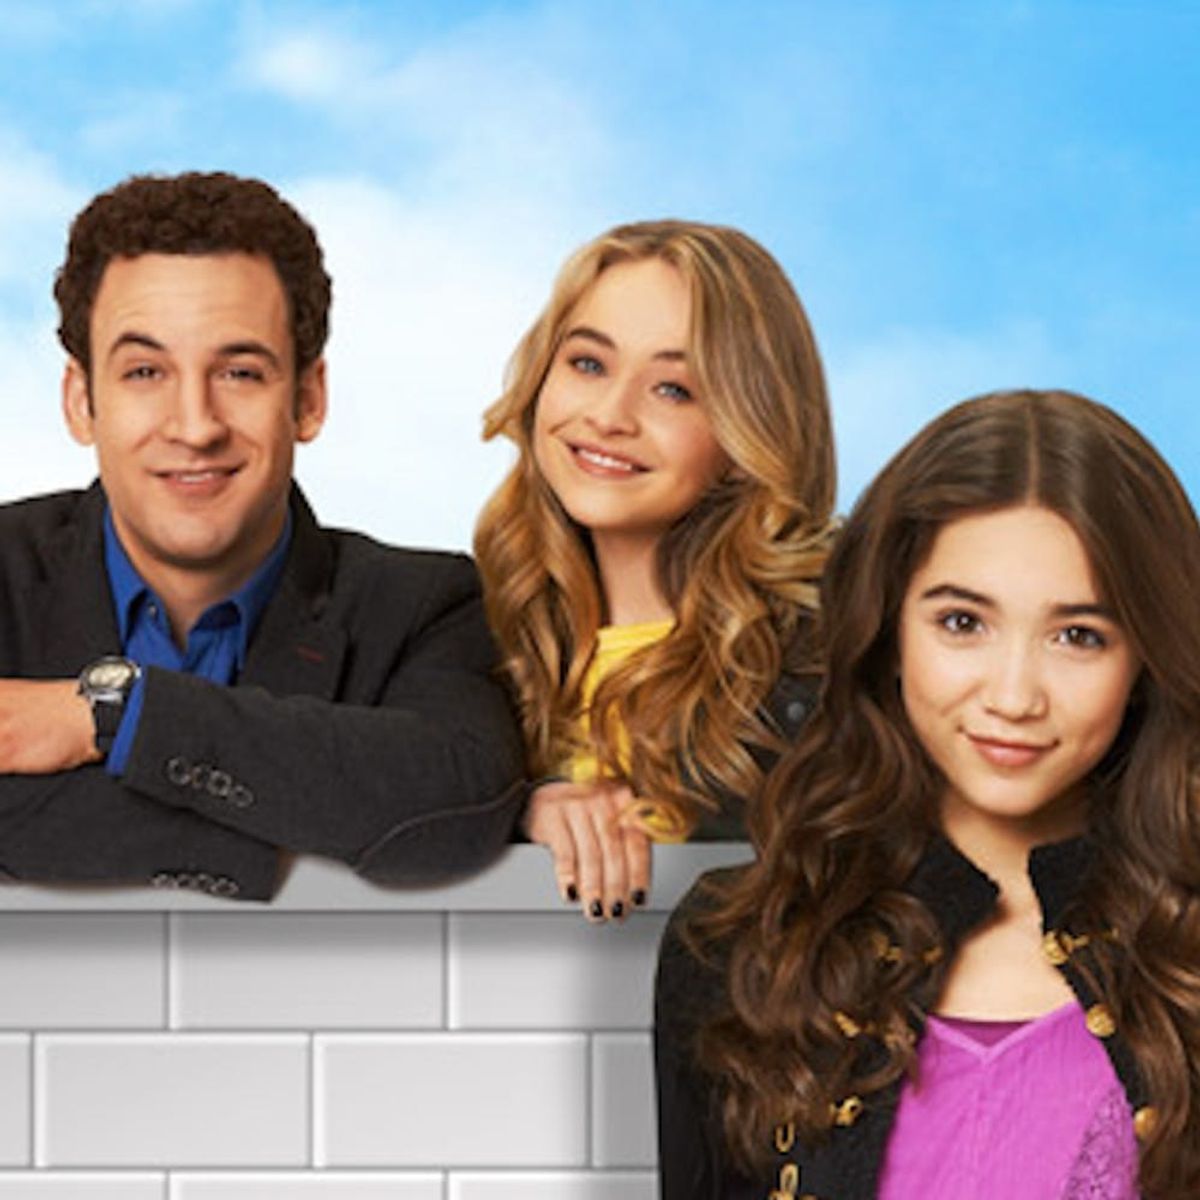 The Only 4 Girl Meets World Episodes You Need to Watch for Max Nostalgia